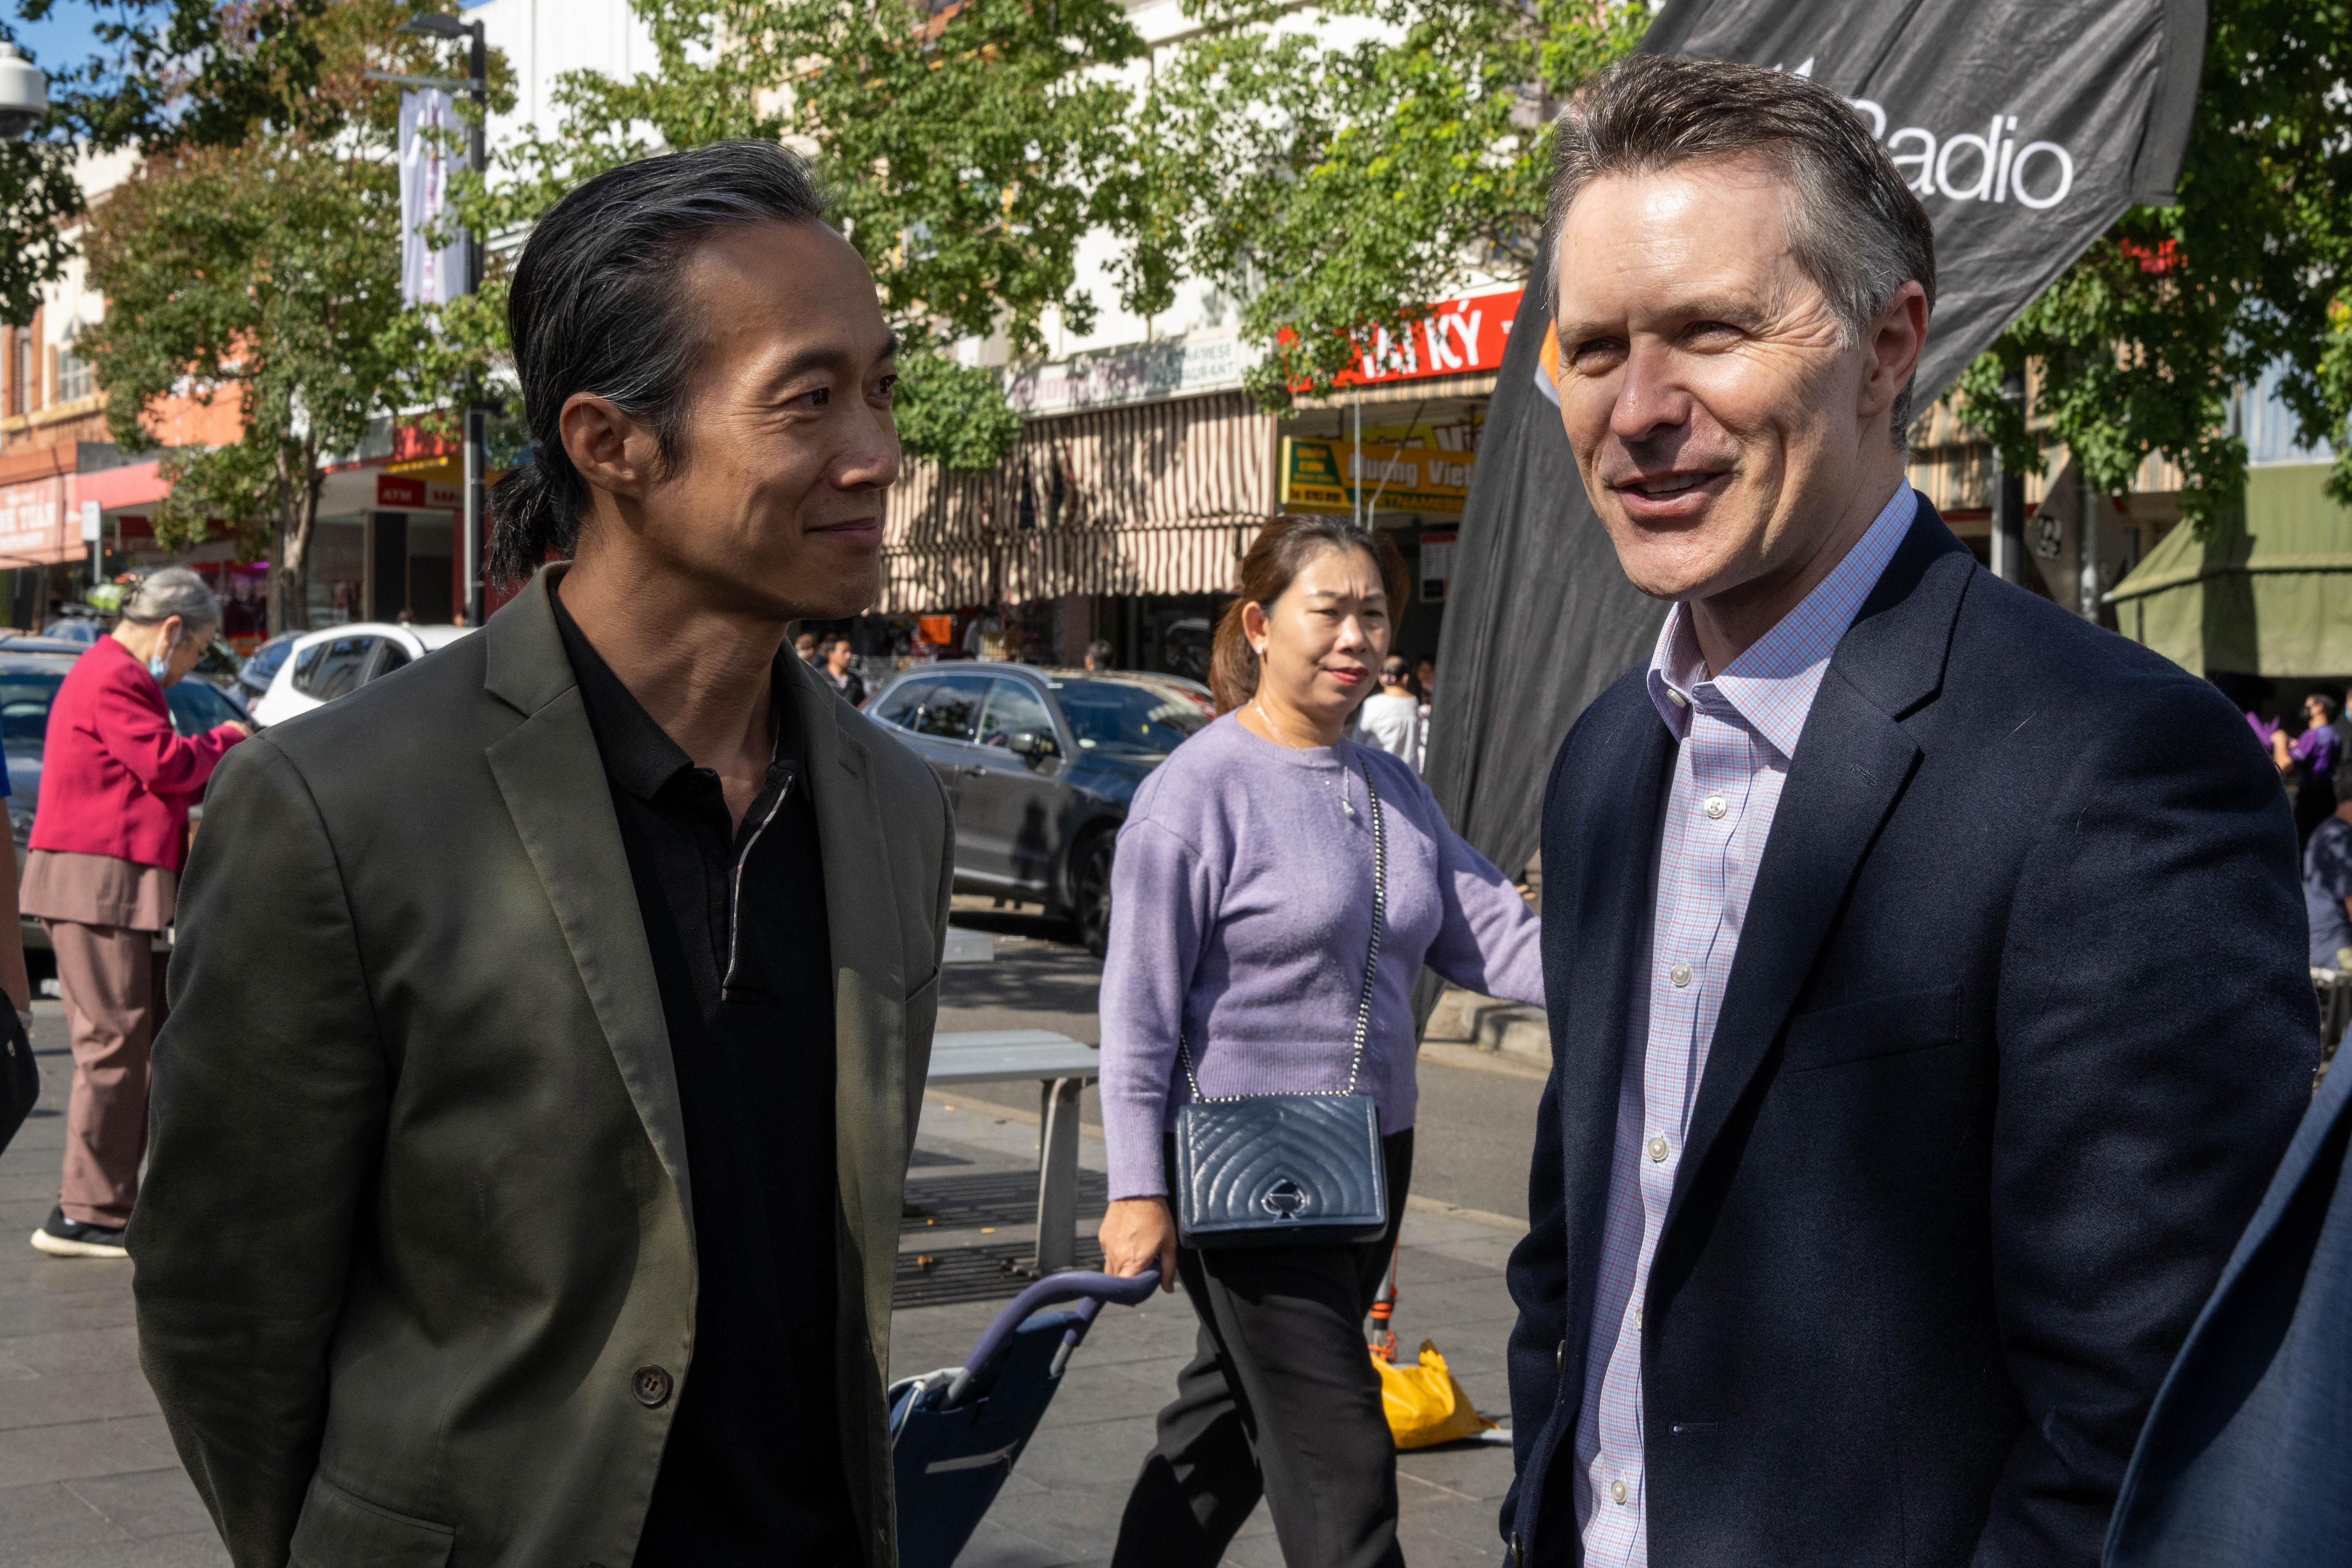 Director of Audio and Language Content at SBS, David Hua, and Labor MP Jason Clare at the Bankstown event.